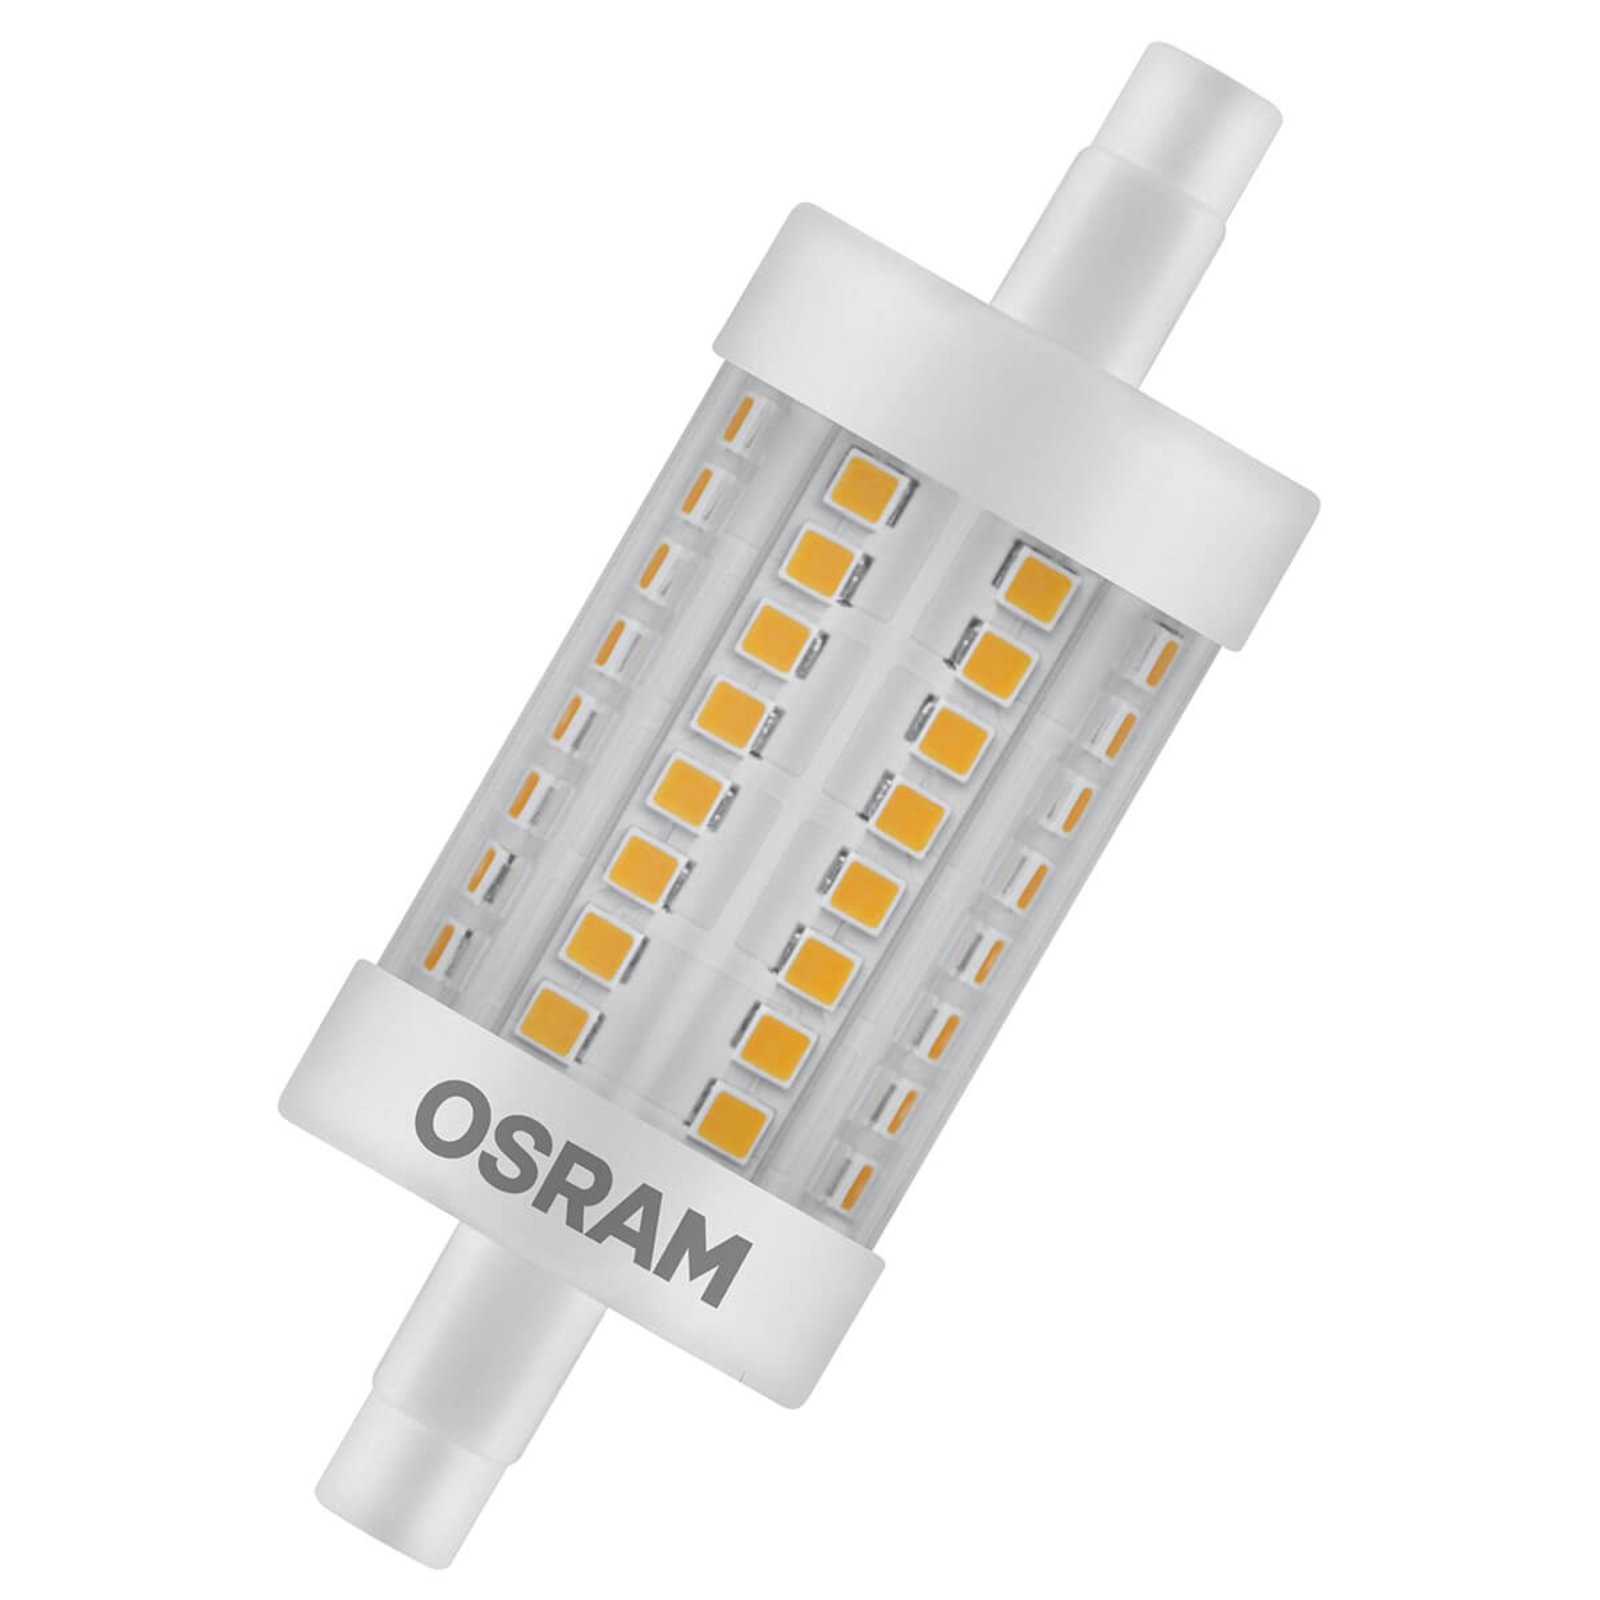 OSRAM LED staaflamp R7s 8,2W warmwit 1.055 lm